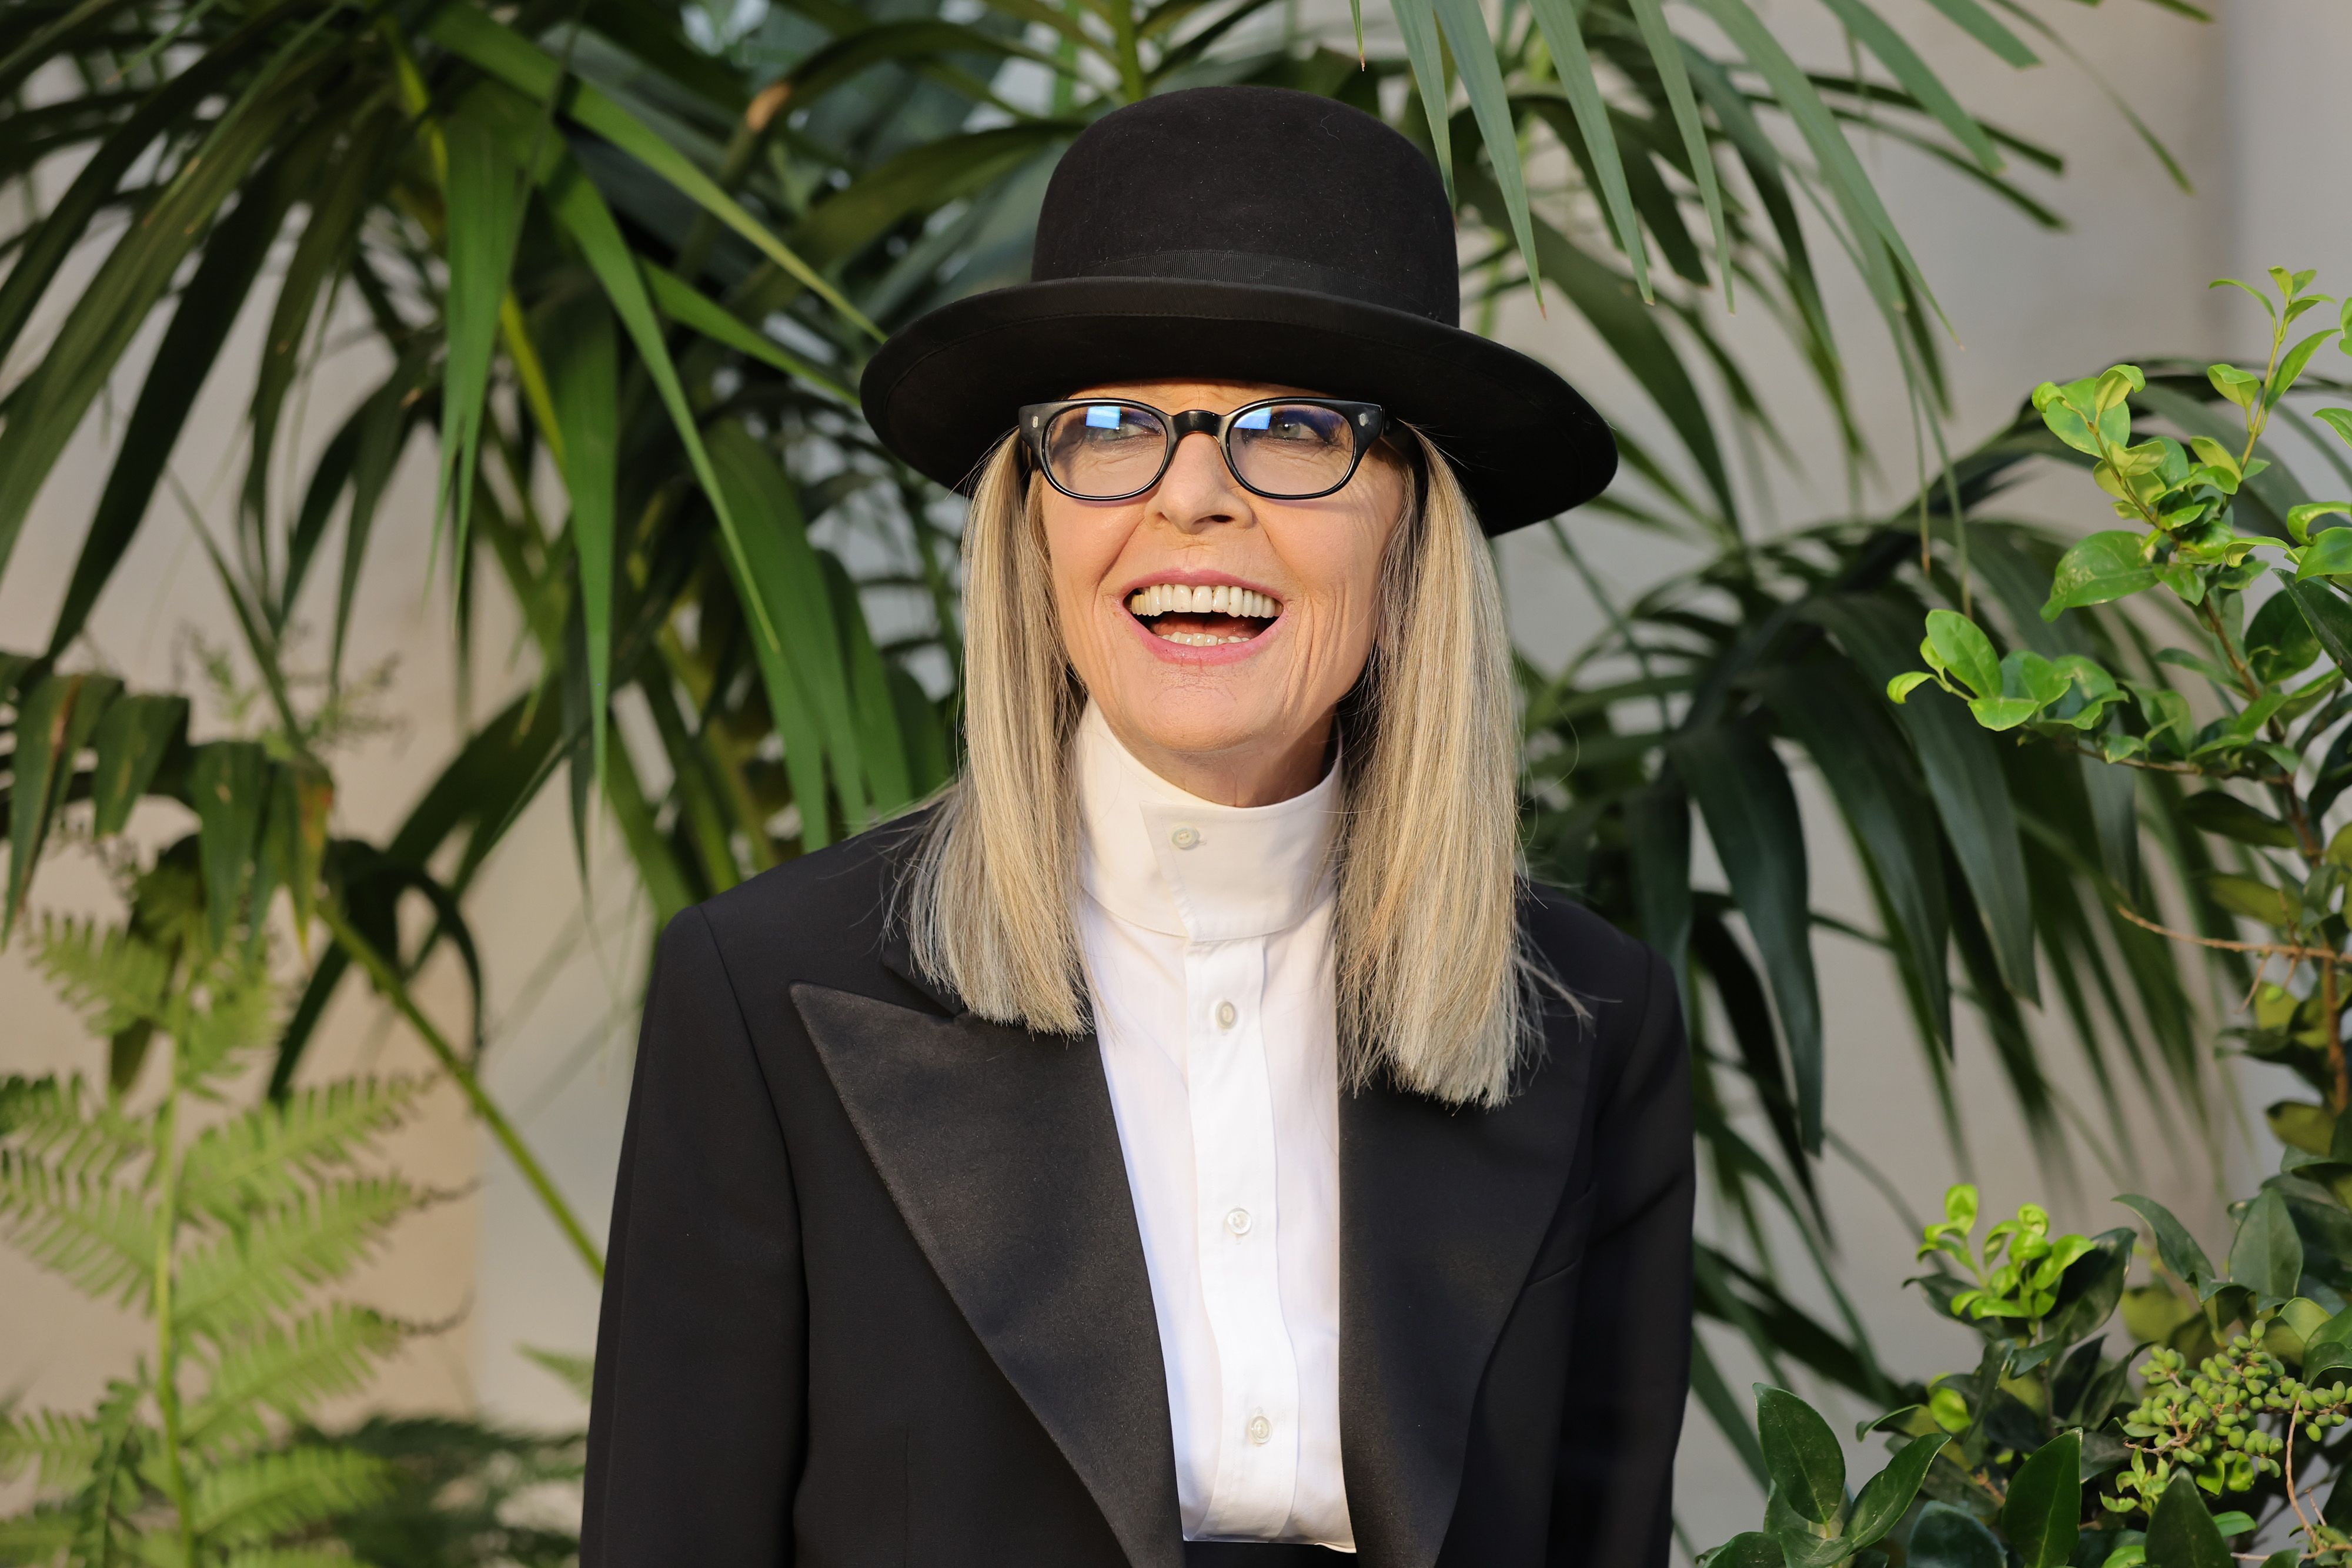 Diane Keaton attends the Ralph Lauren SS23 Runway Show at The Huntington Library, Art Collections, and Botanical Gardens on October 13, 2022, in San Marino, California. | Source: Getty Images